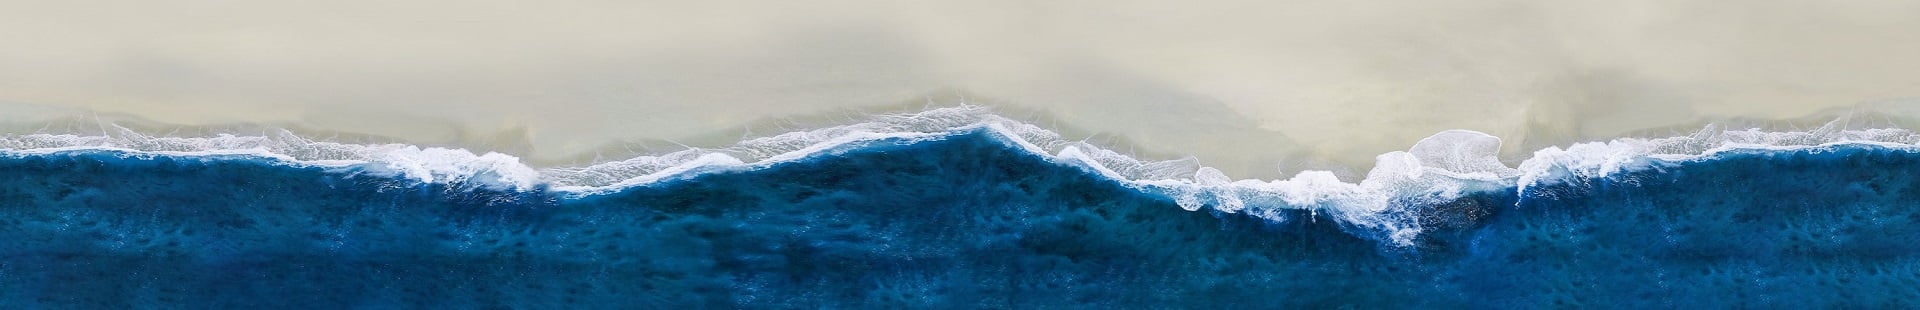 bnr-waves-crashing-on-beach-viewed-from-above-01-variation-05